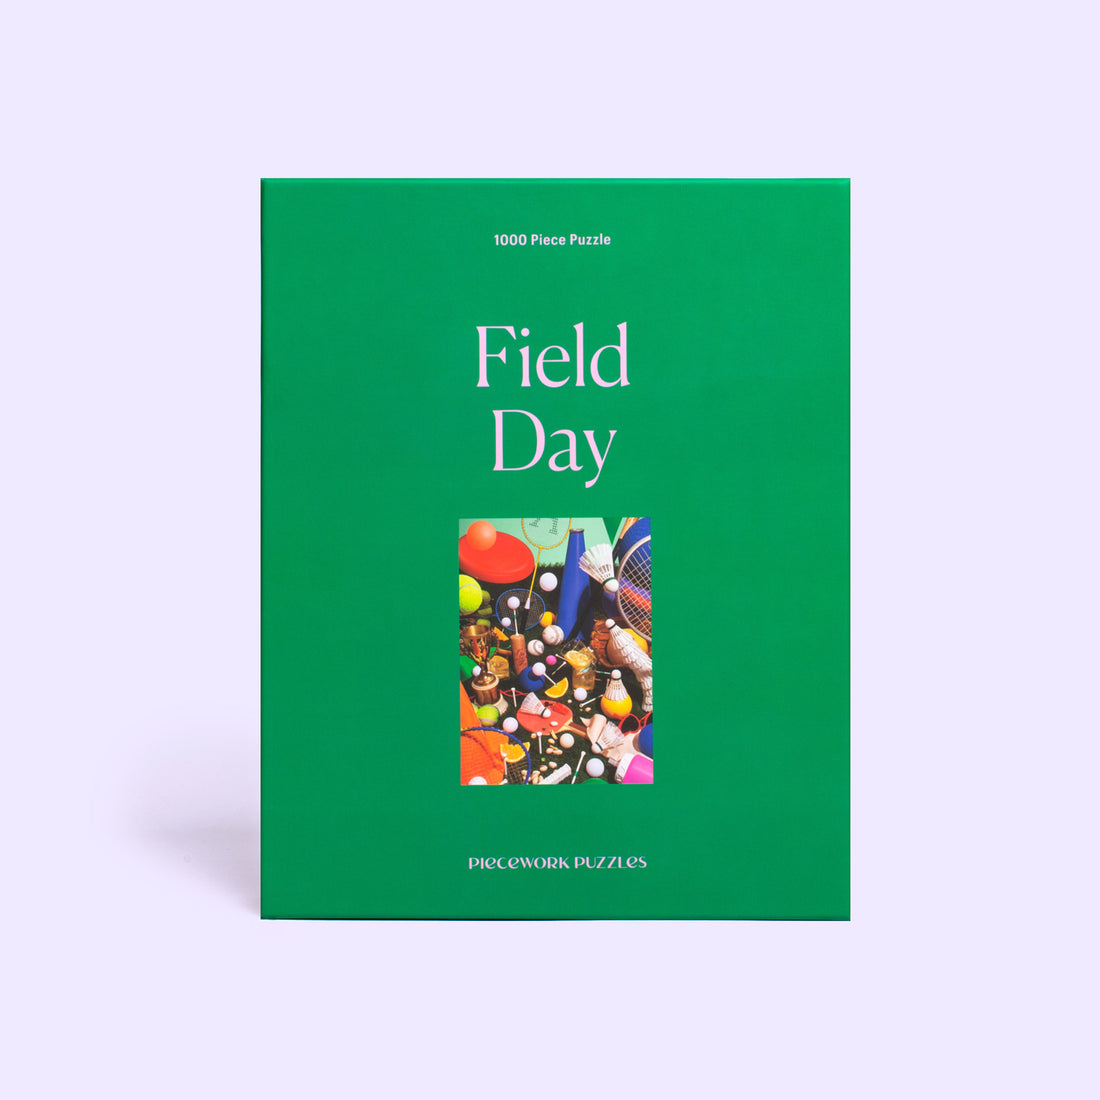 Field Day Piecework Puzzles